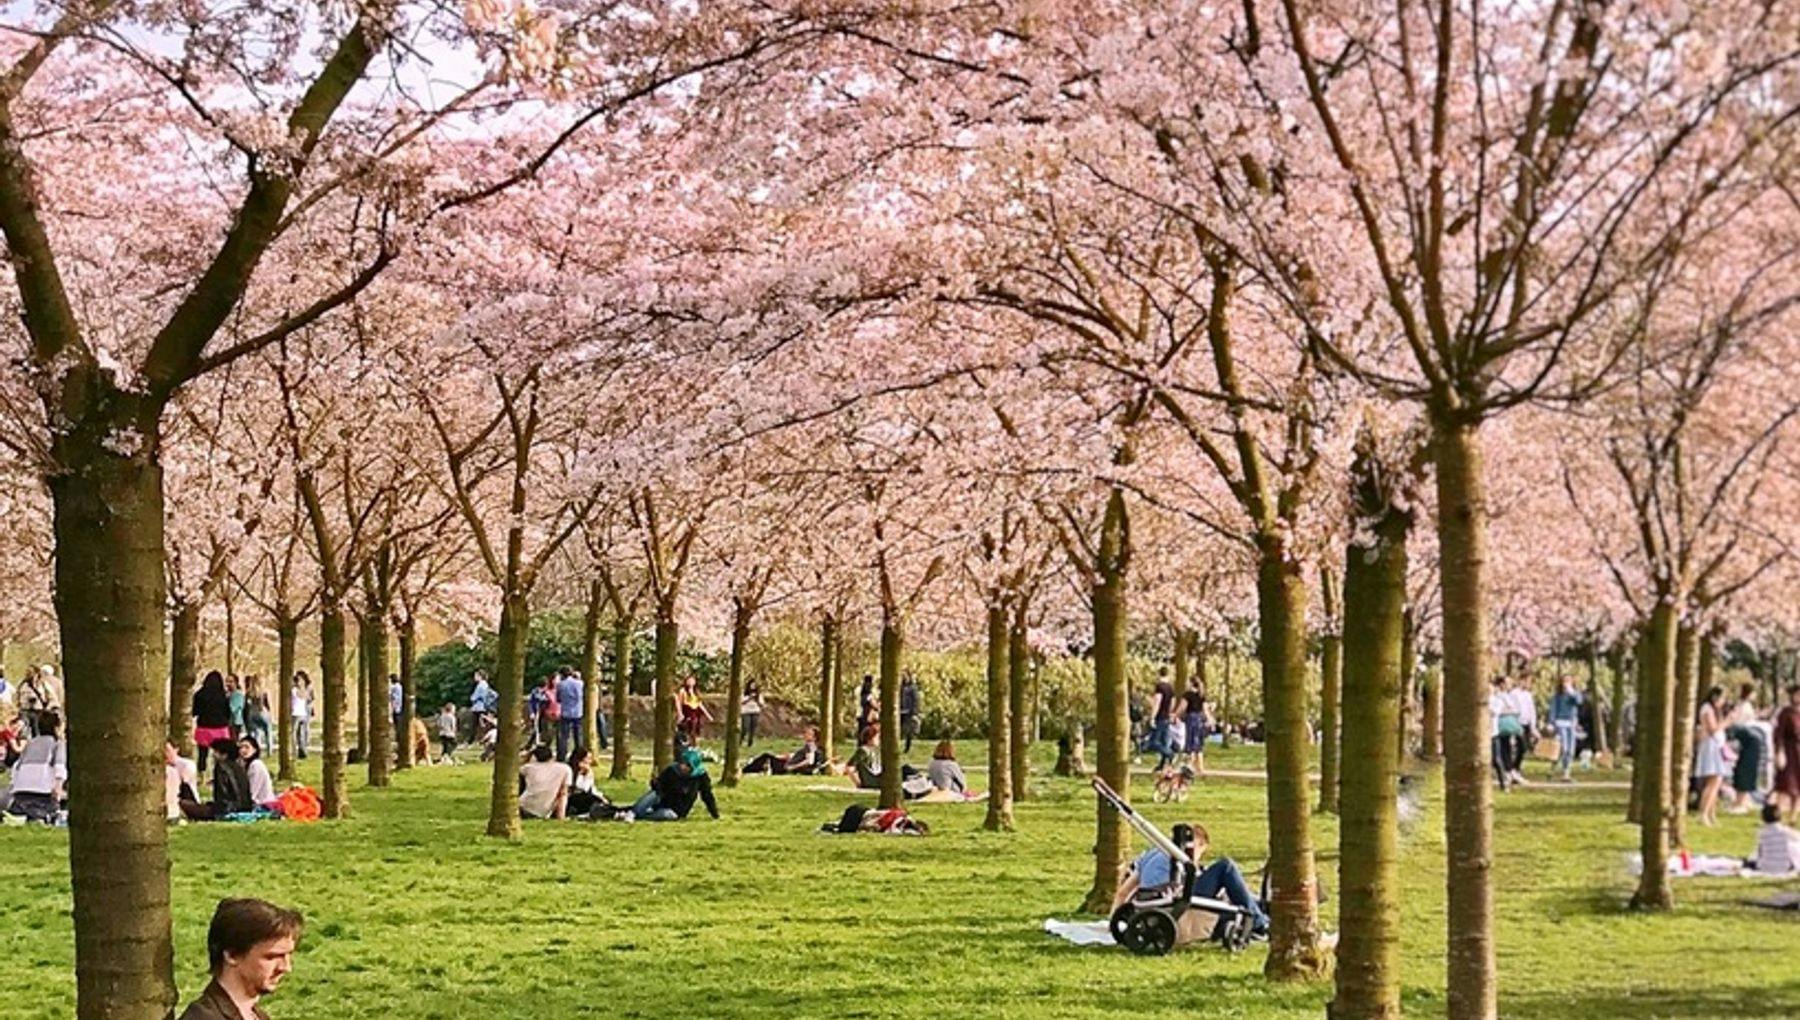 People sitting in The blossoming garden Kersen bos